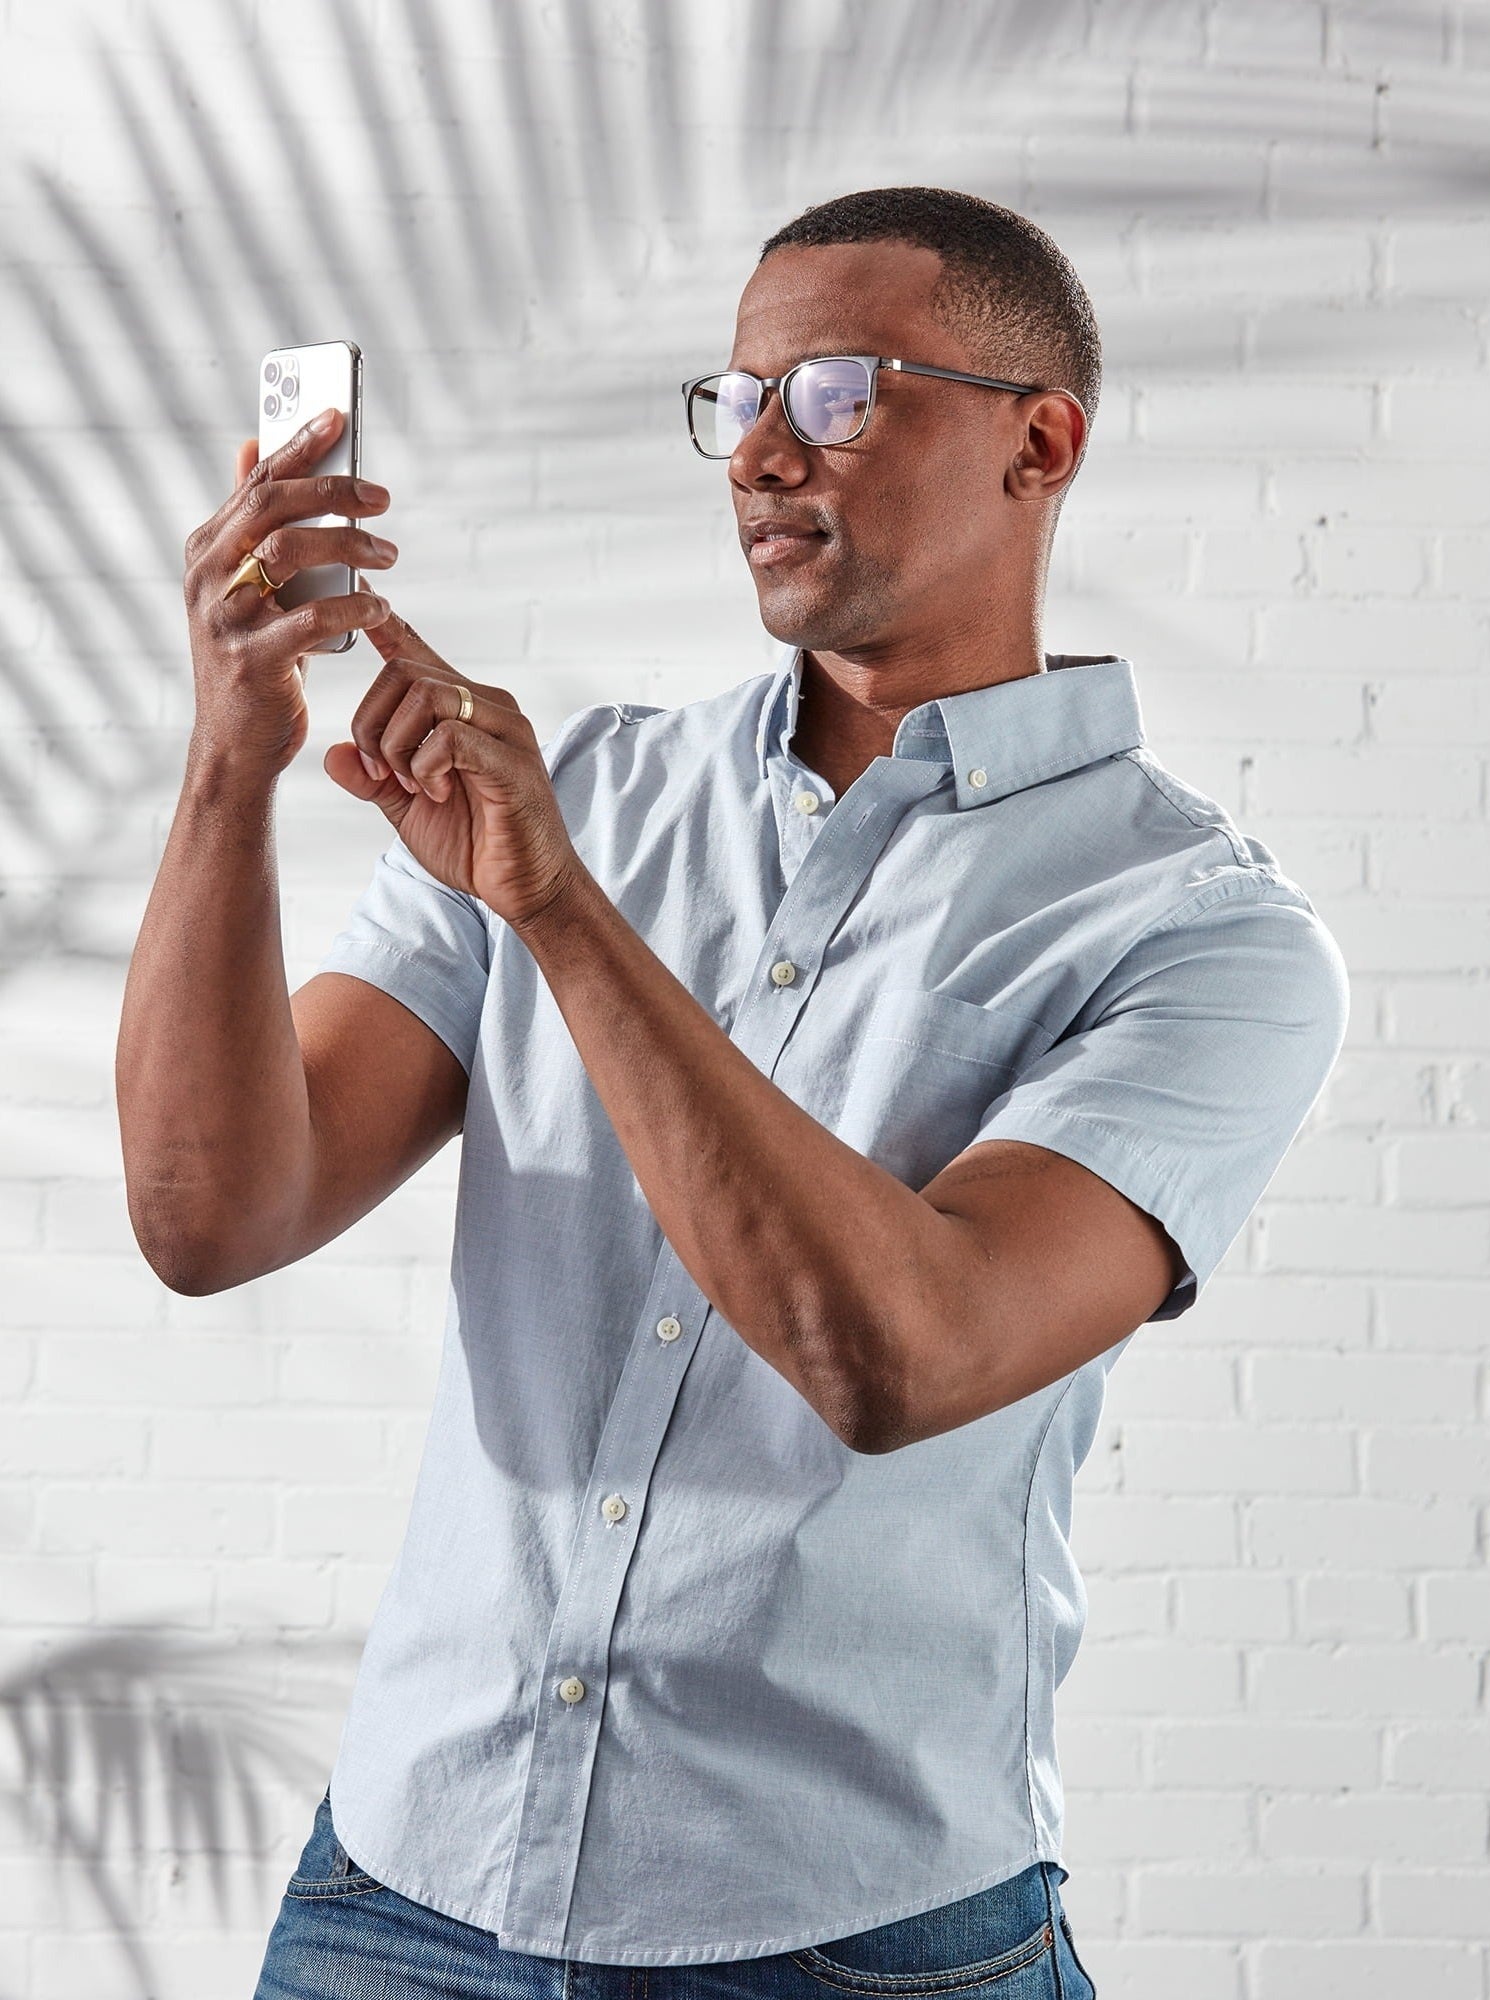 model wearing the glasses and looking at a phone